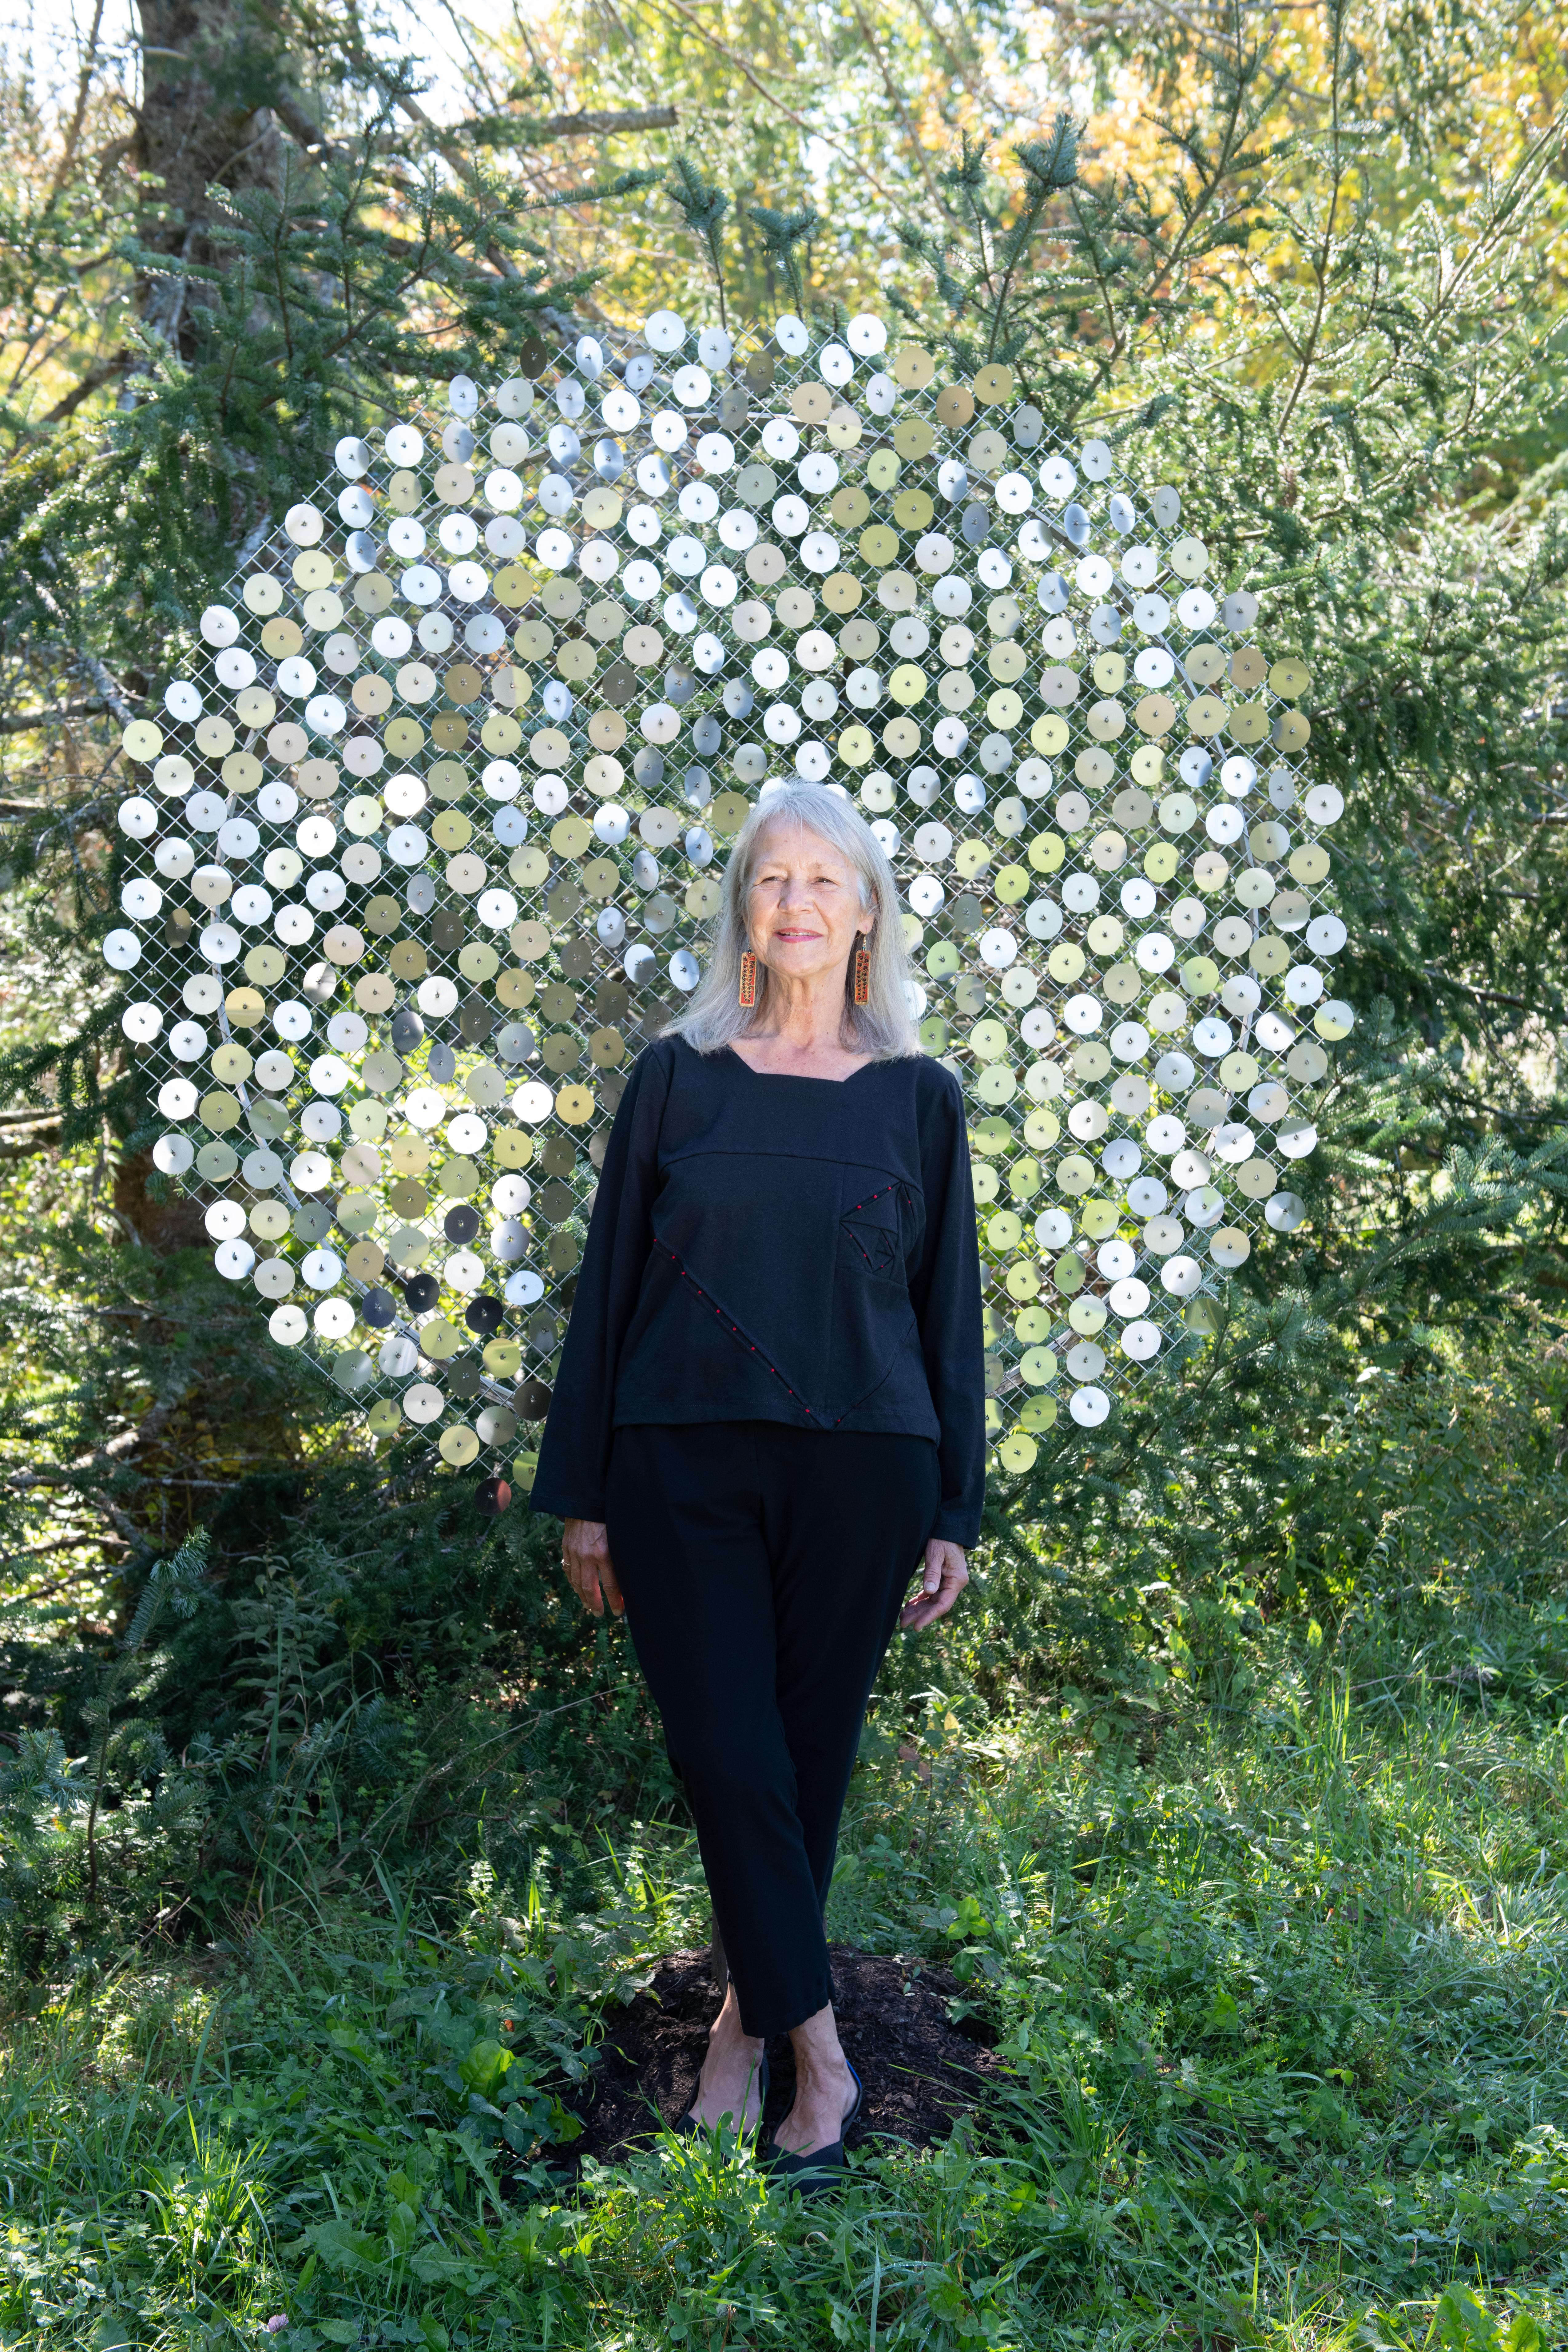 June, in the Body Story top, in front of George Sherwood’s shimmering stainless steel piece, “Memory of Fibonacci”